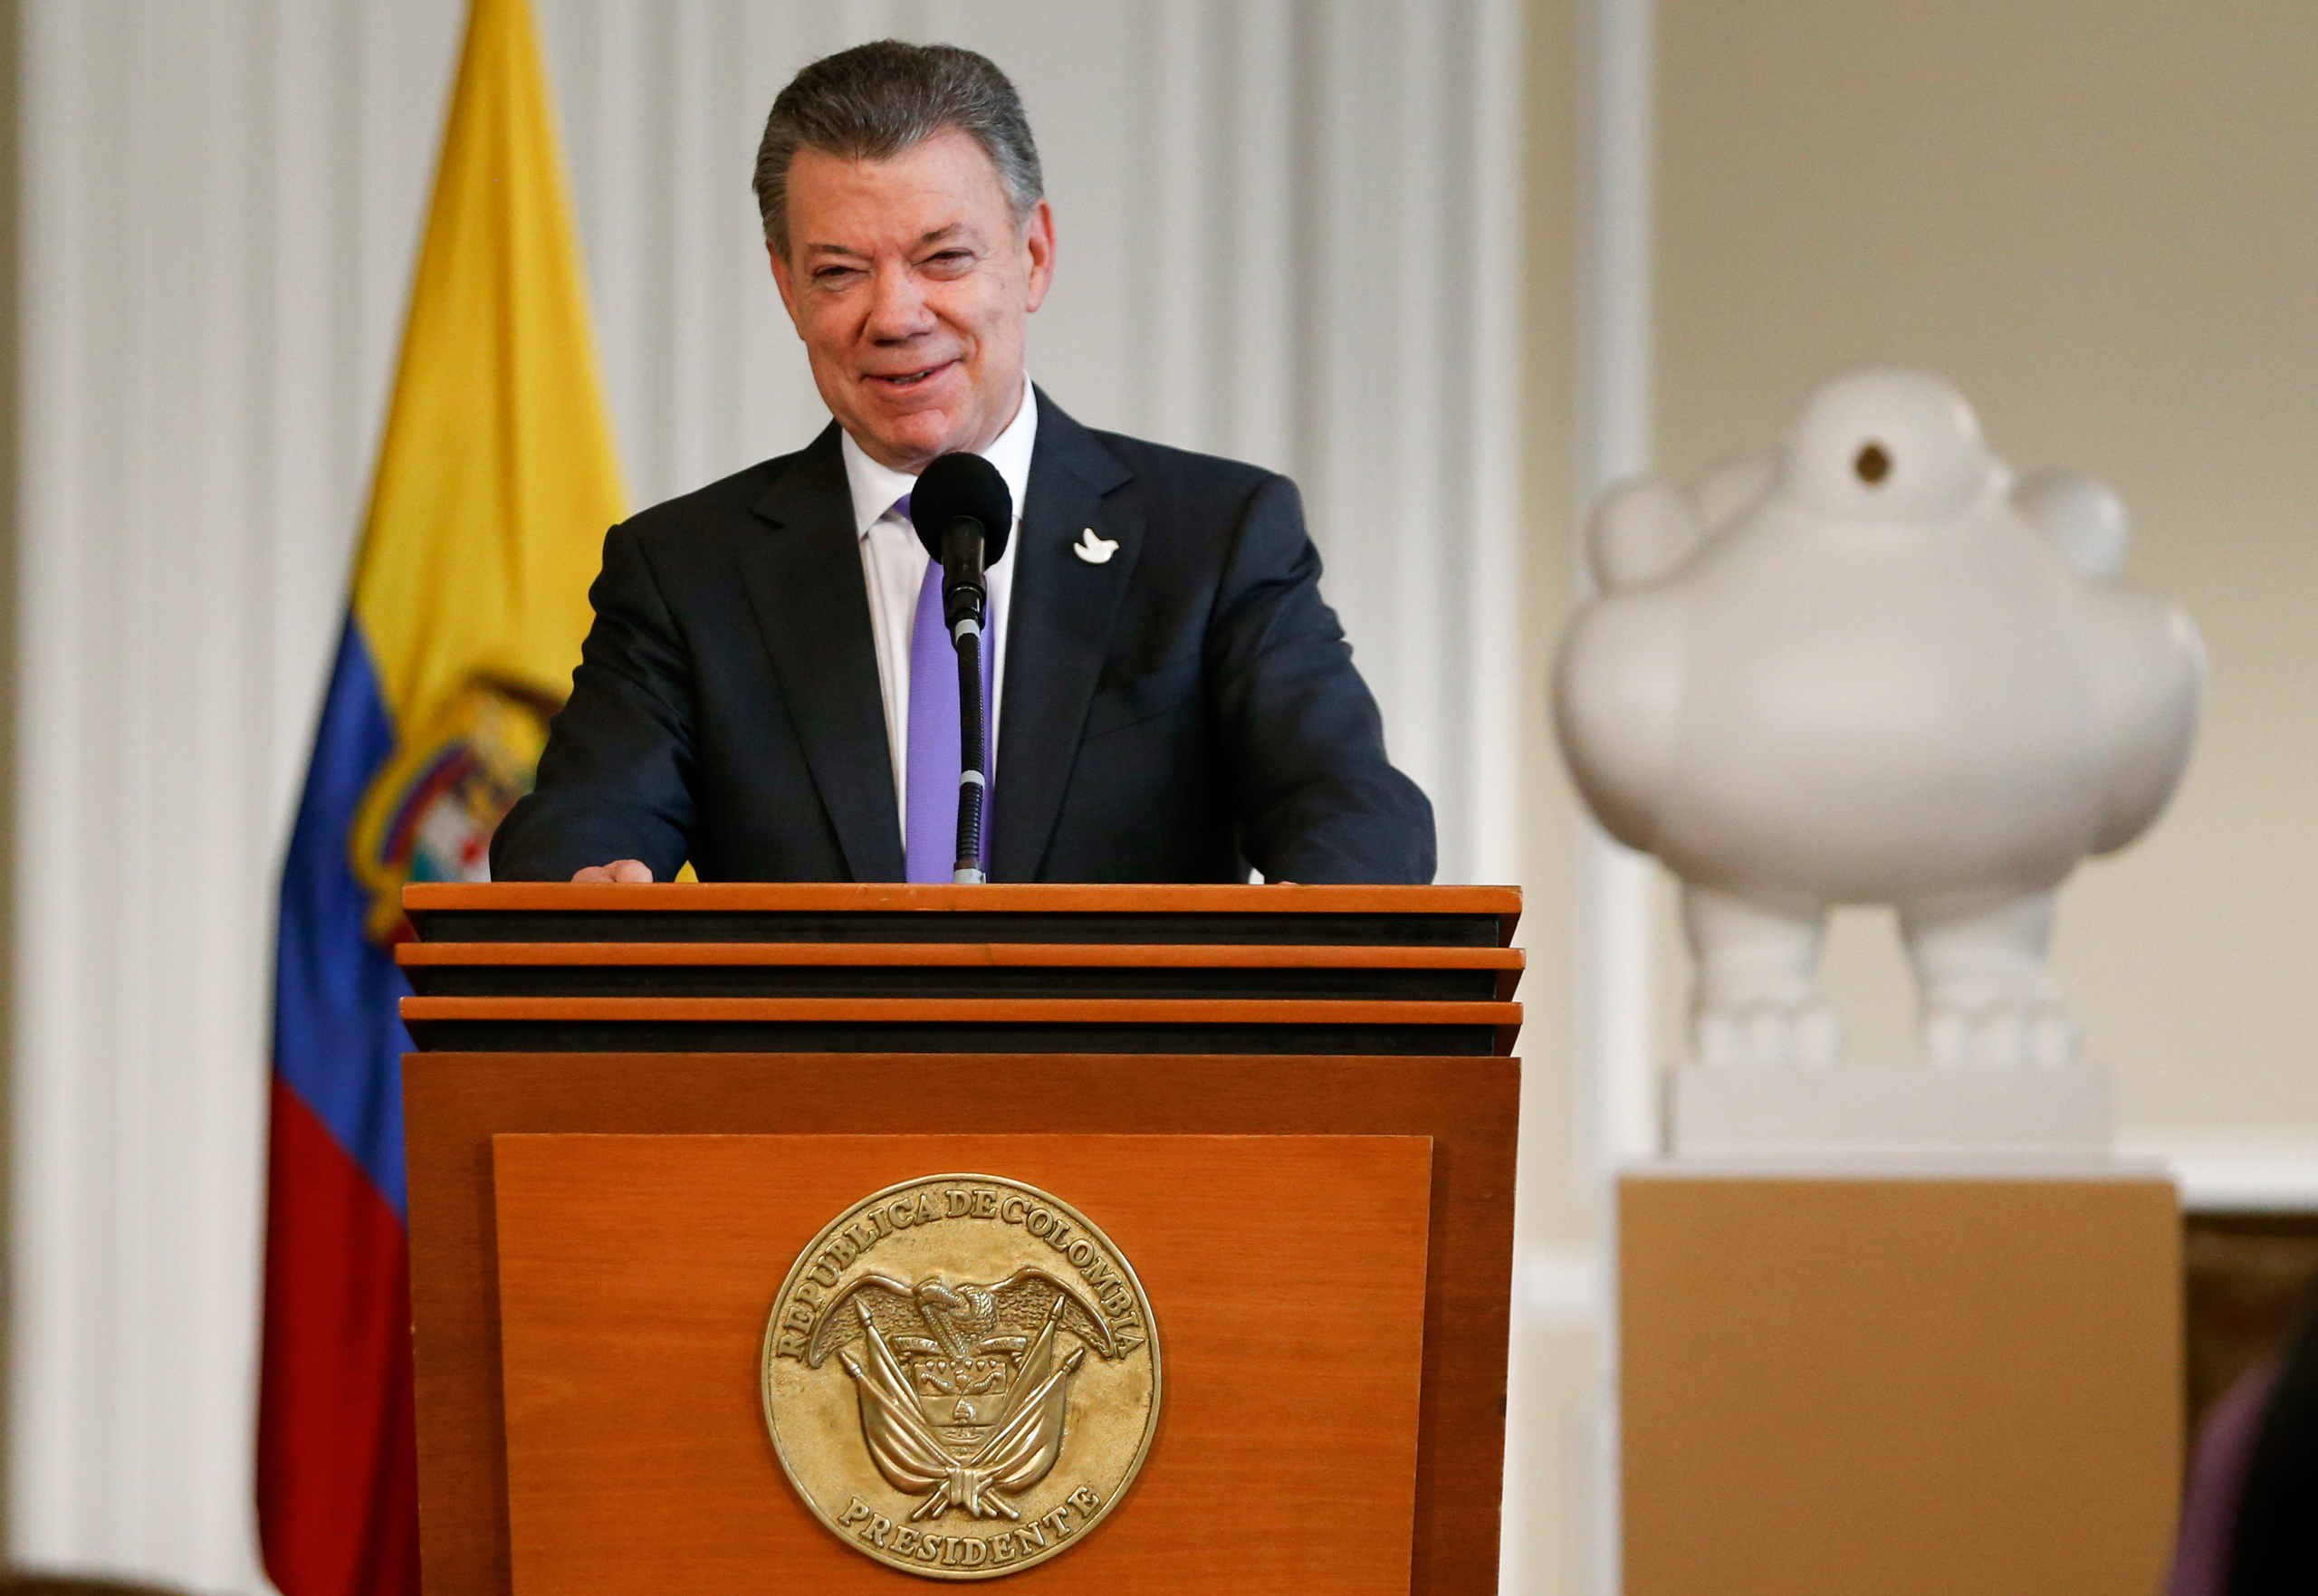 Colombia's President Juan Manuel Santos speaks to supporters of the peace deal he signed with rebels of the Revolutionary Armed Forces of Colombia, FARC, at the presidential palace in Bogota on Oct. 7, 2016. (Fernando Vergara—AP)